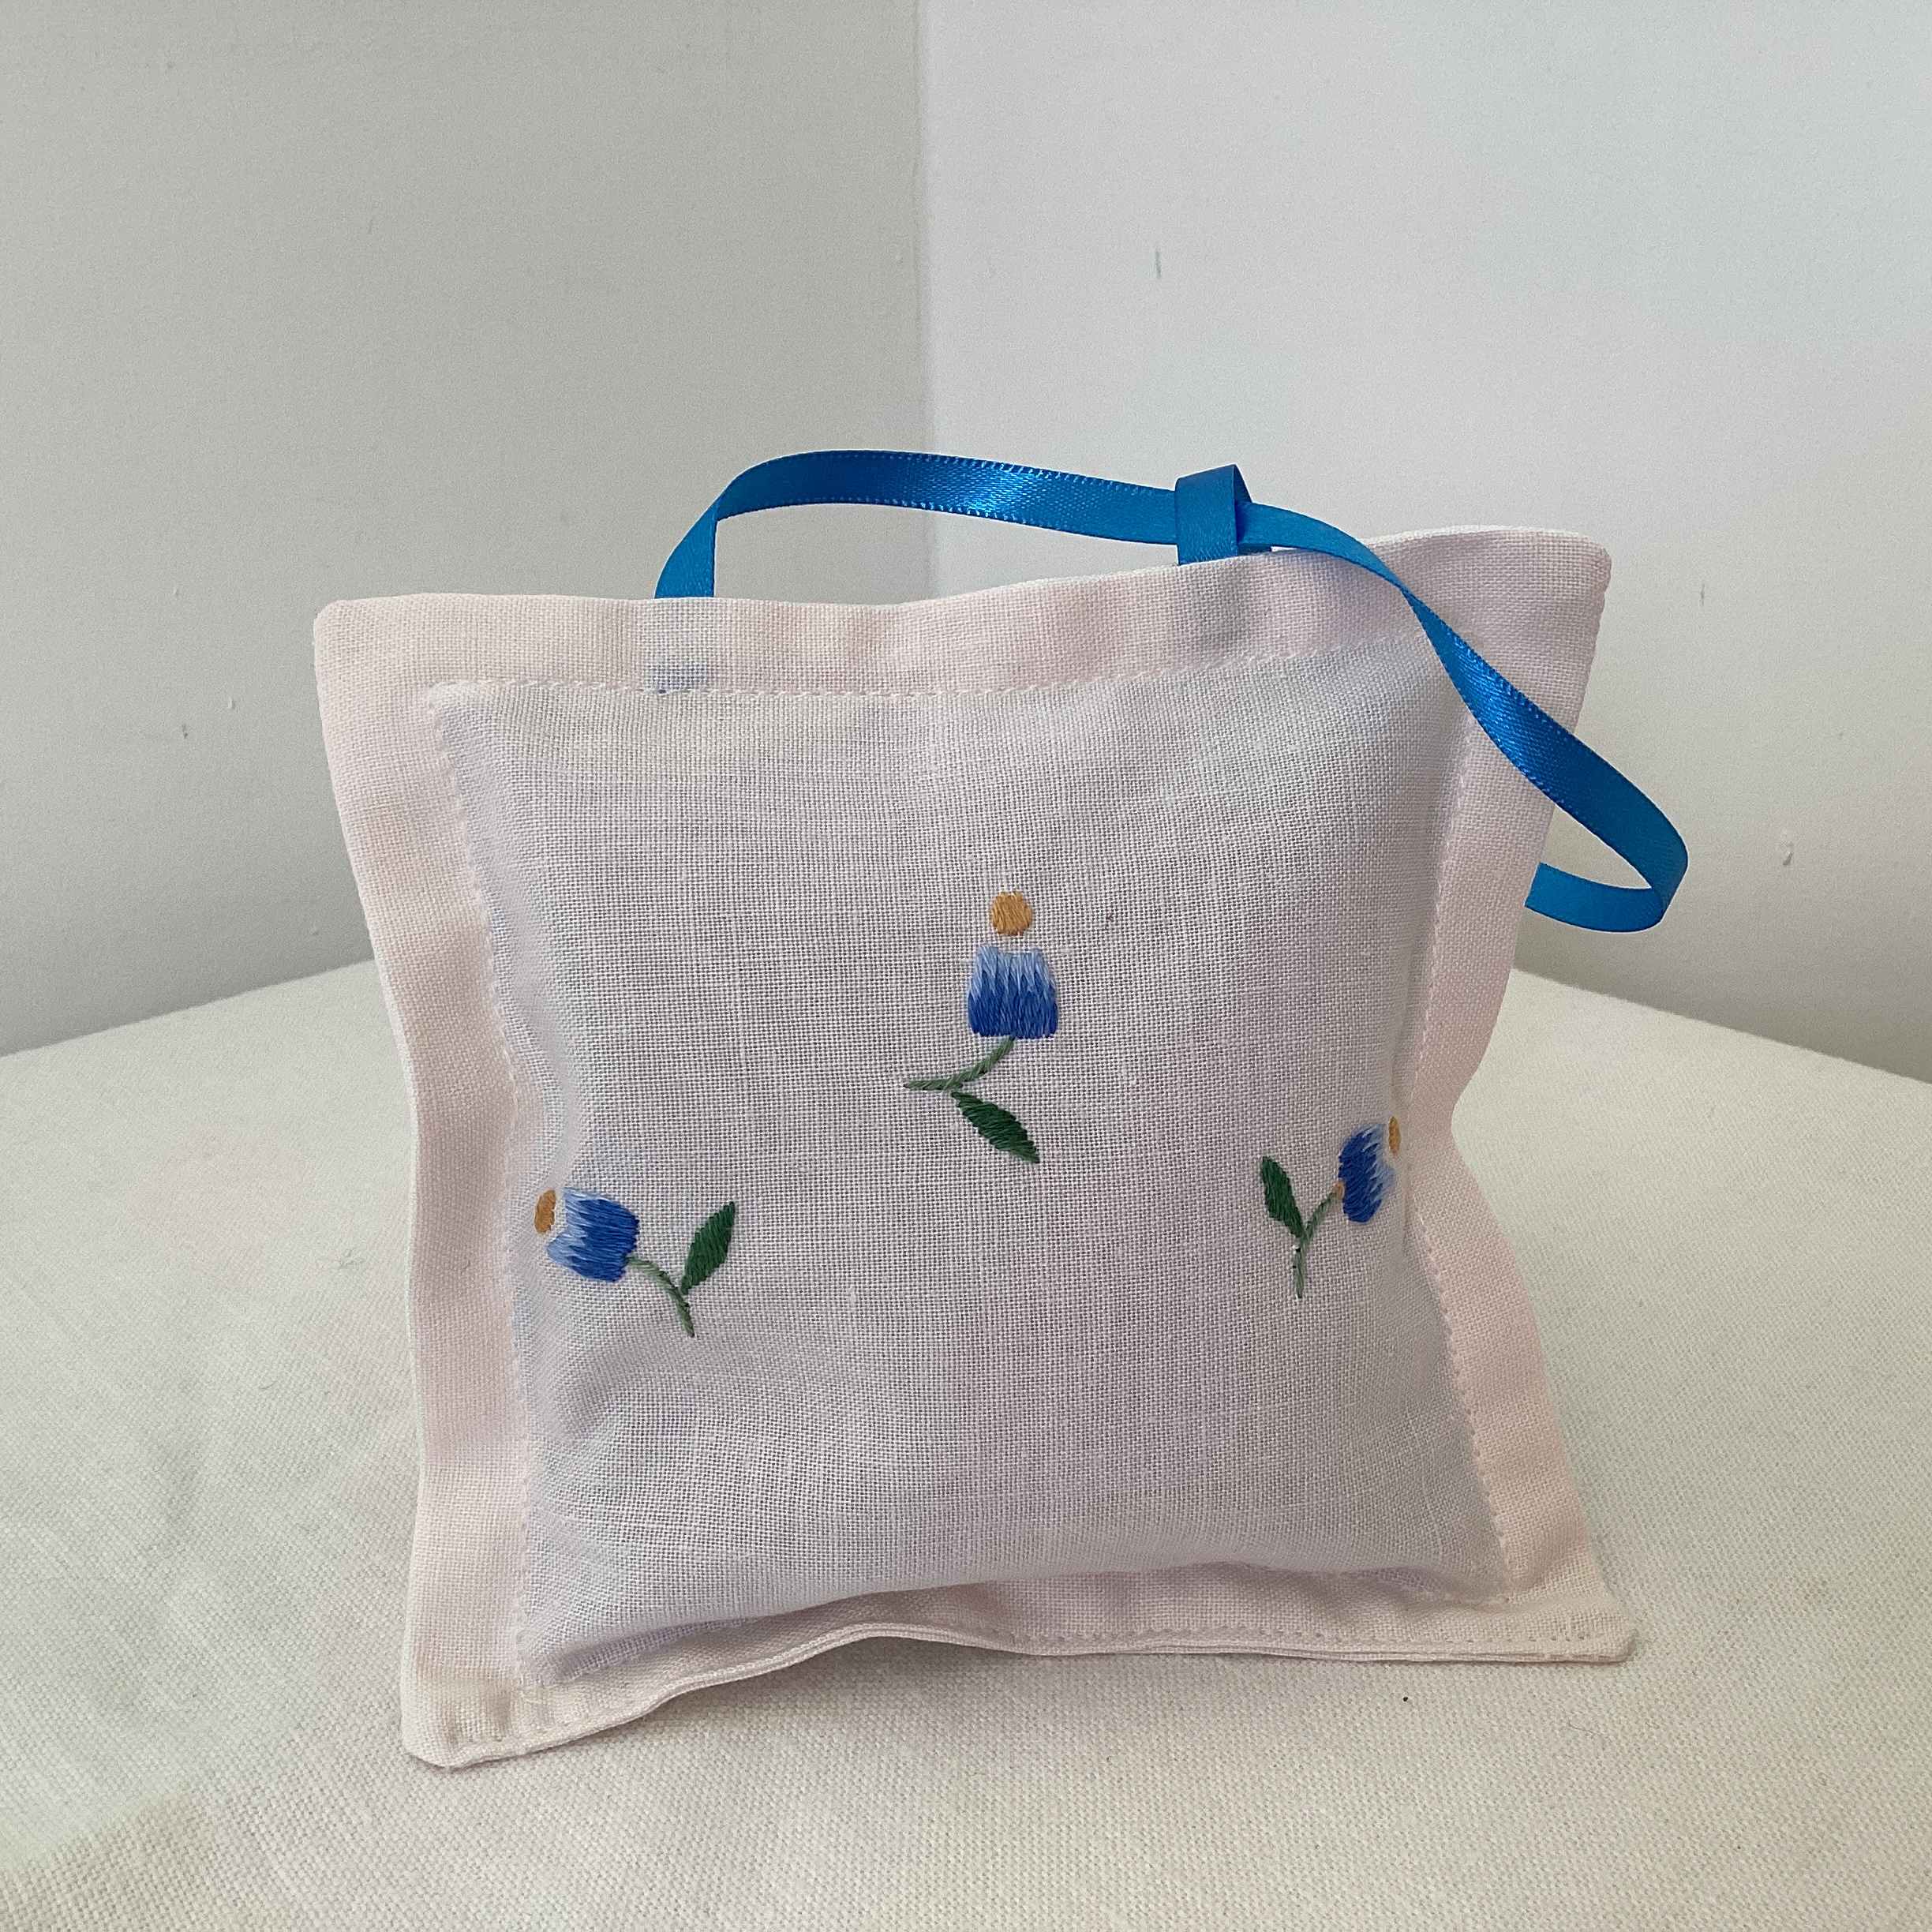 Lavender Bag - vintage embroidery with pale blue flowers